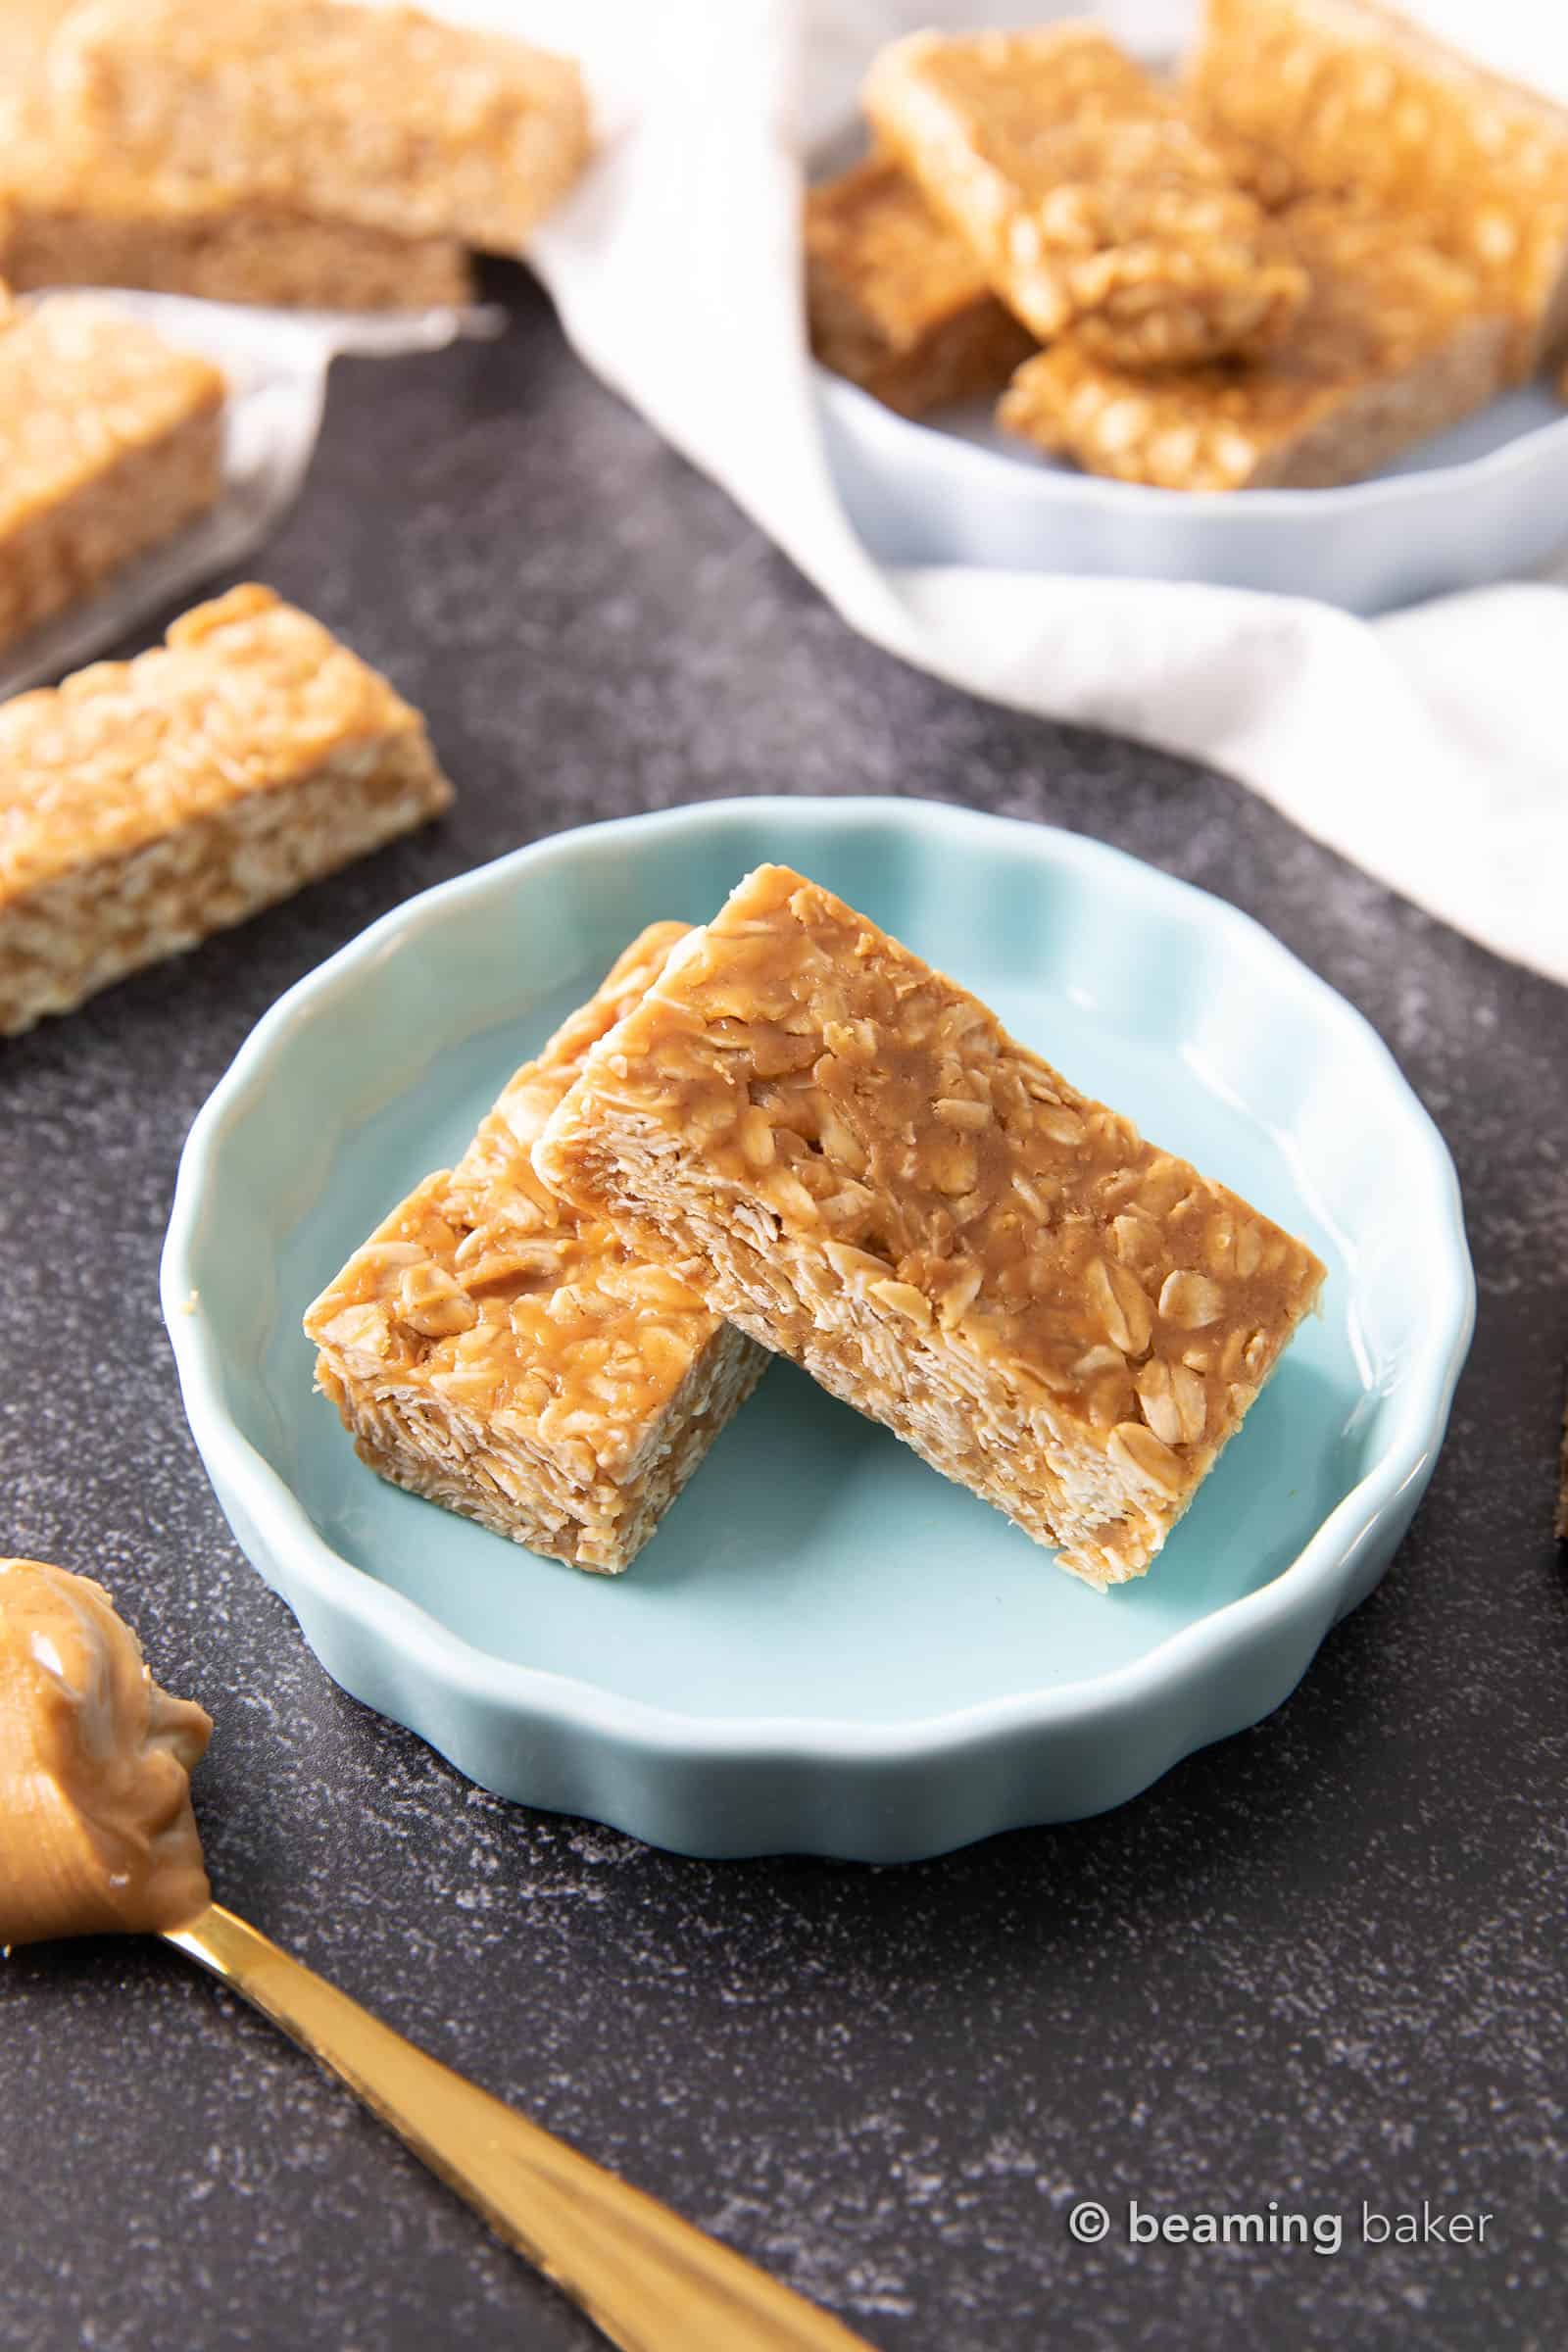 3 Ingredient No Bake Peanut Butter Granola Bars (GF): this homemade peanut butter granola bars recipe is so EASY! The best oatmeal peanut butter granola bars recipe without honey, that tastes like honey roasted peanuts. Healthy, Vegan, Gluten Free. #PeanutButter #GranolaBars #NoBake #Oatmeal | Recipe at BeamingBaker.com